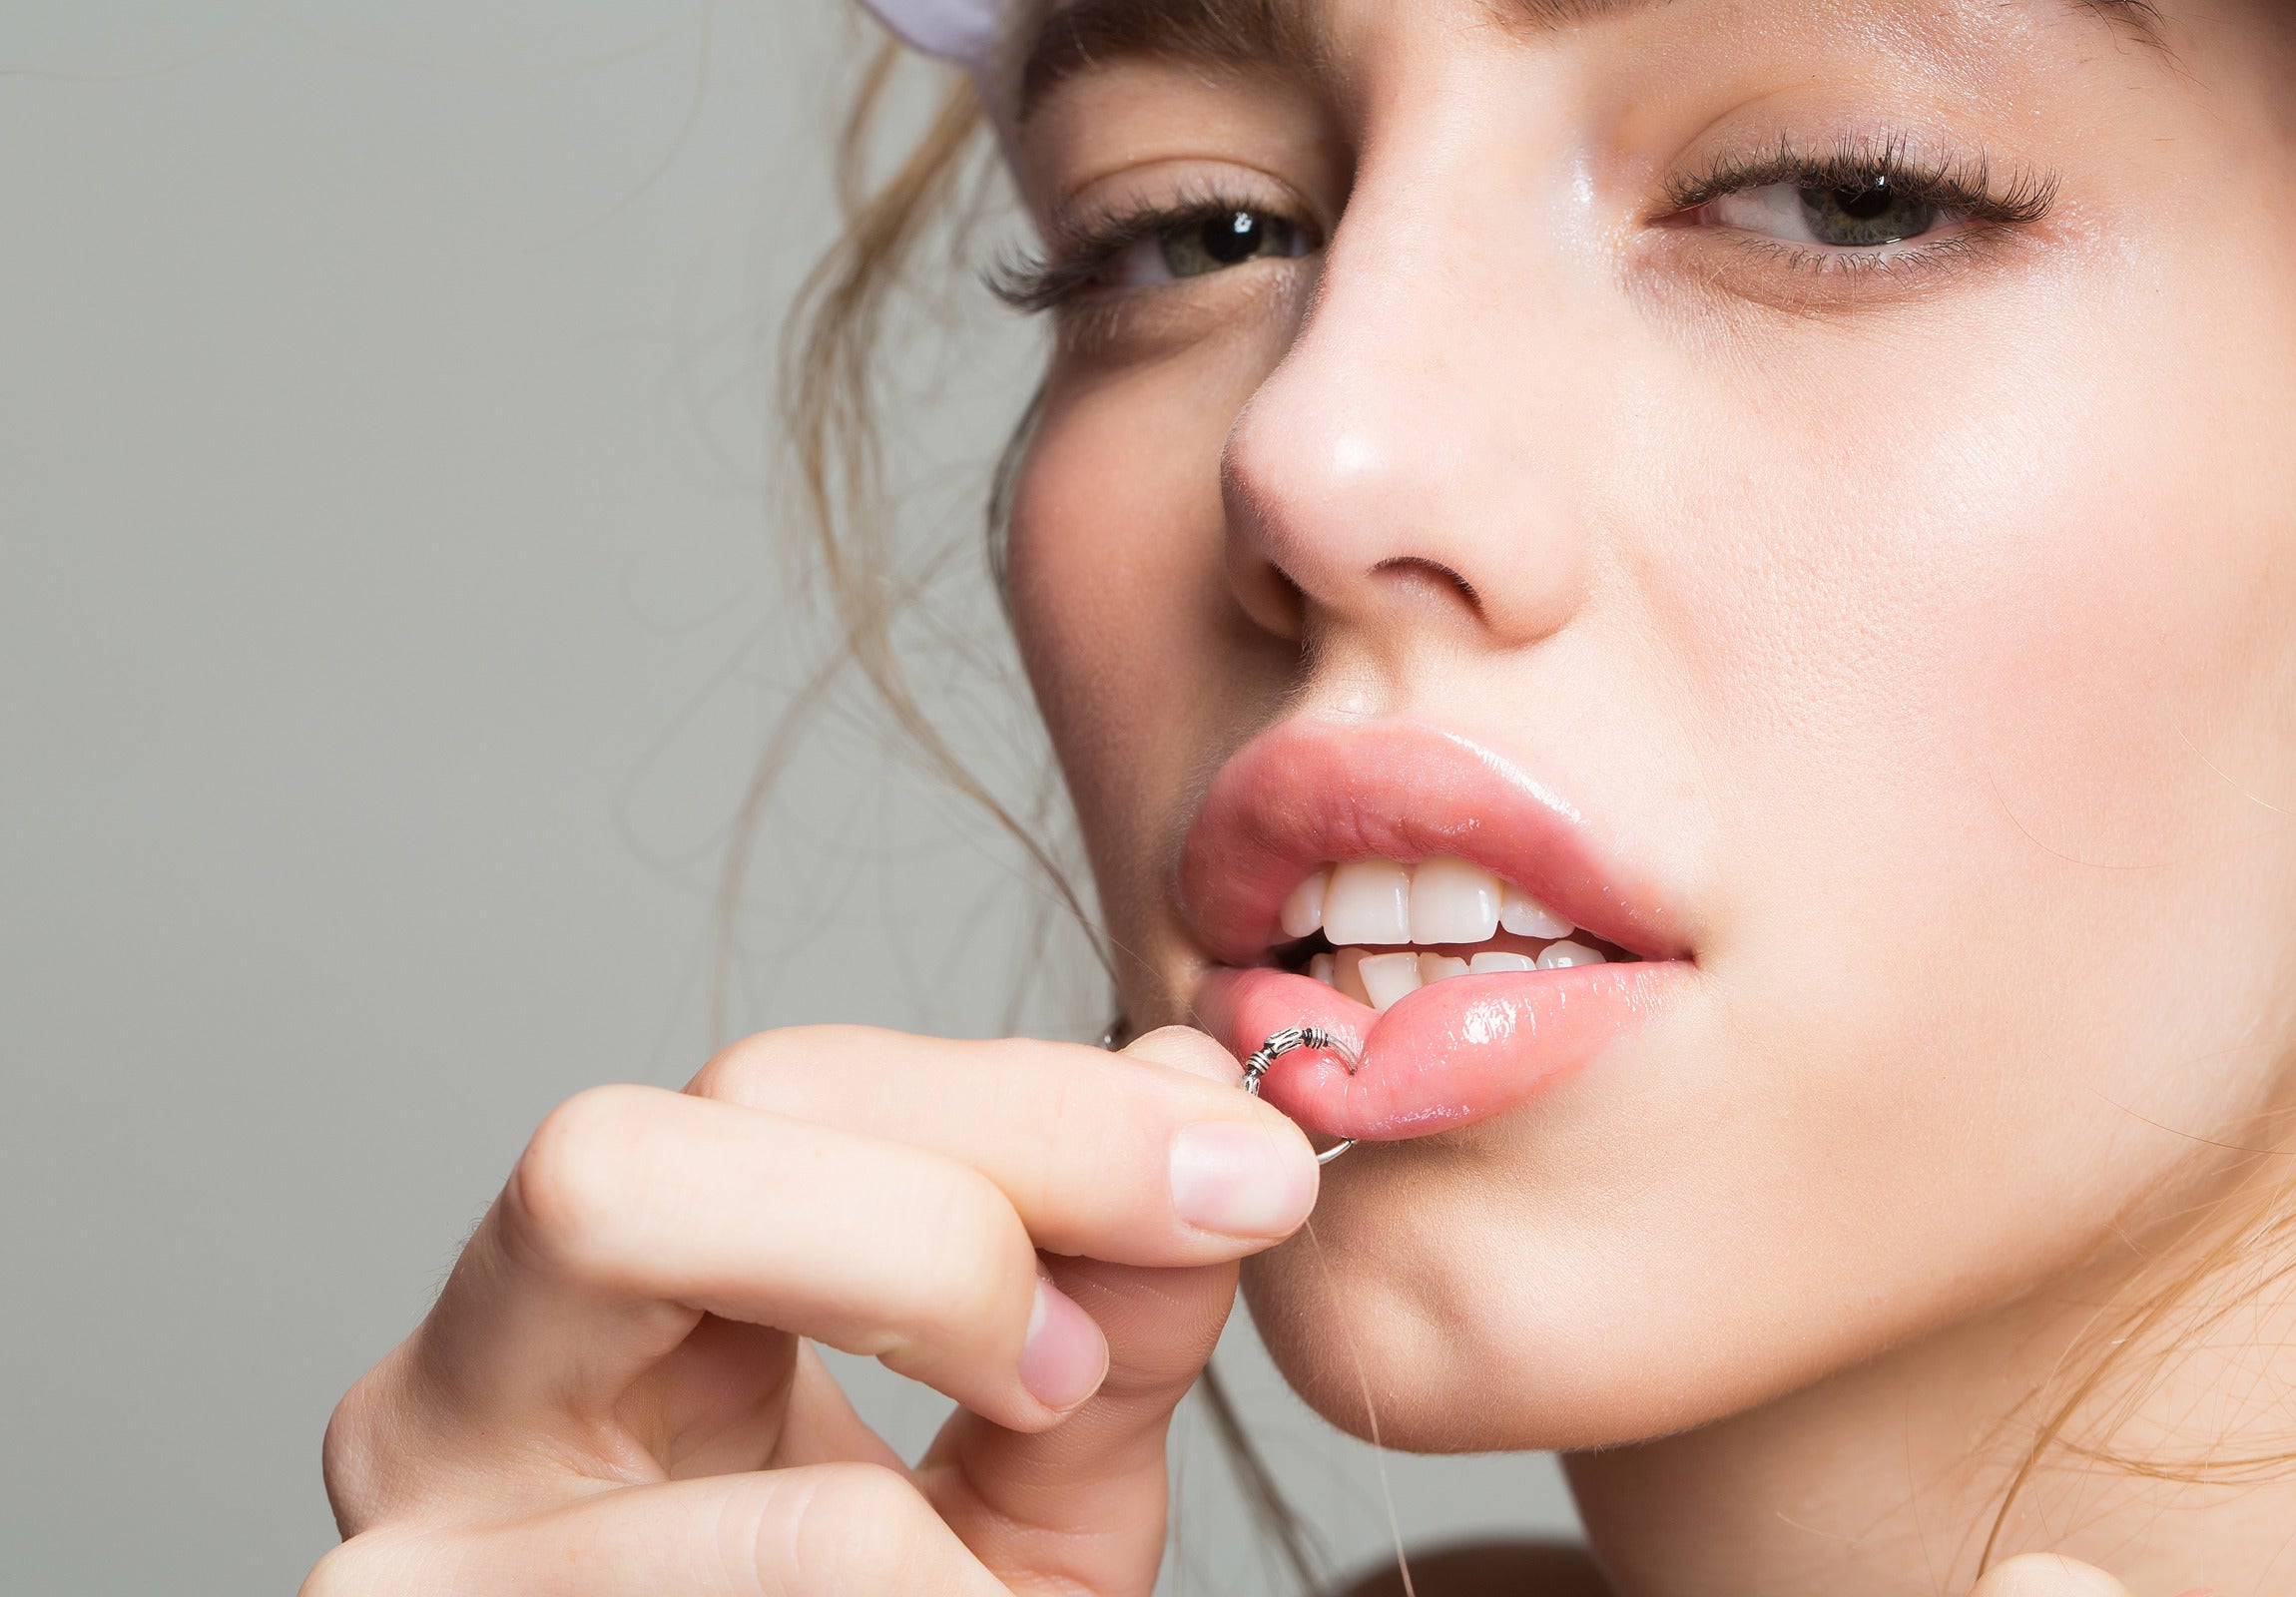 The Immediate Steps to Stop Lip Piercing Embedding